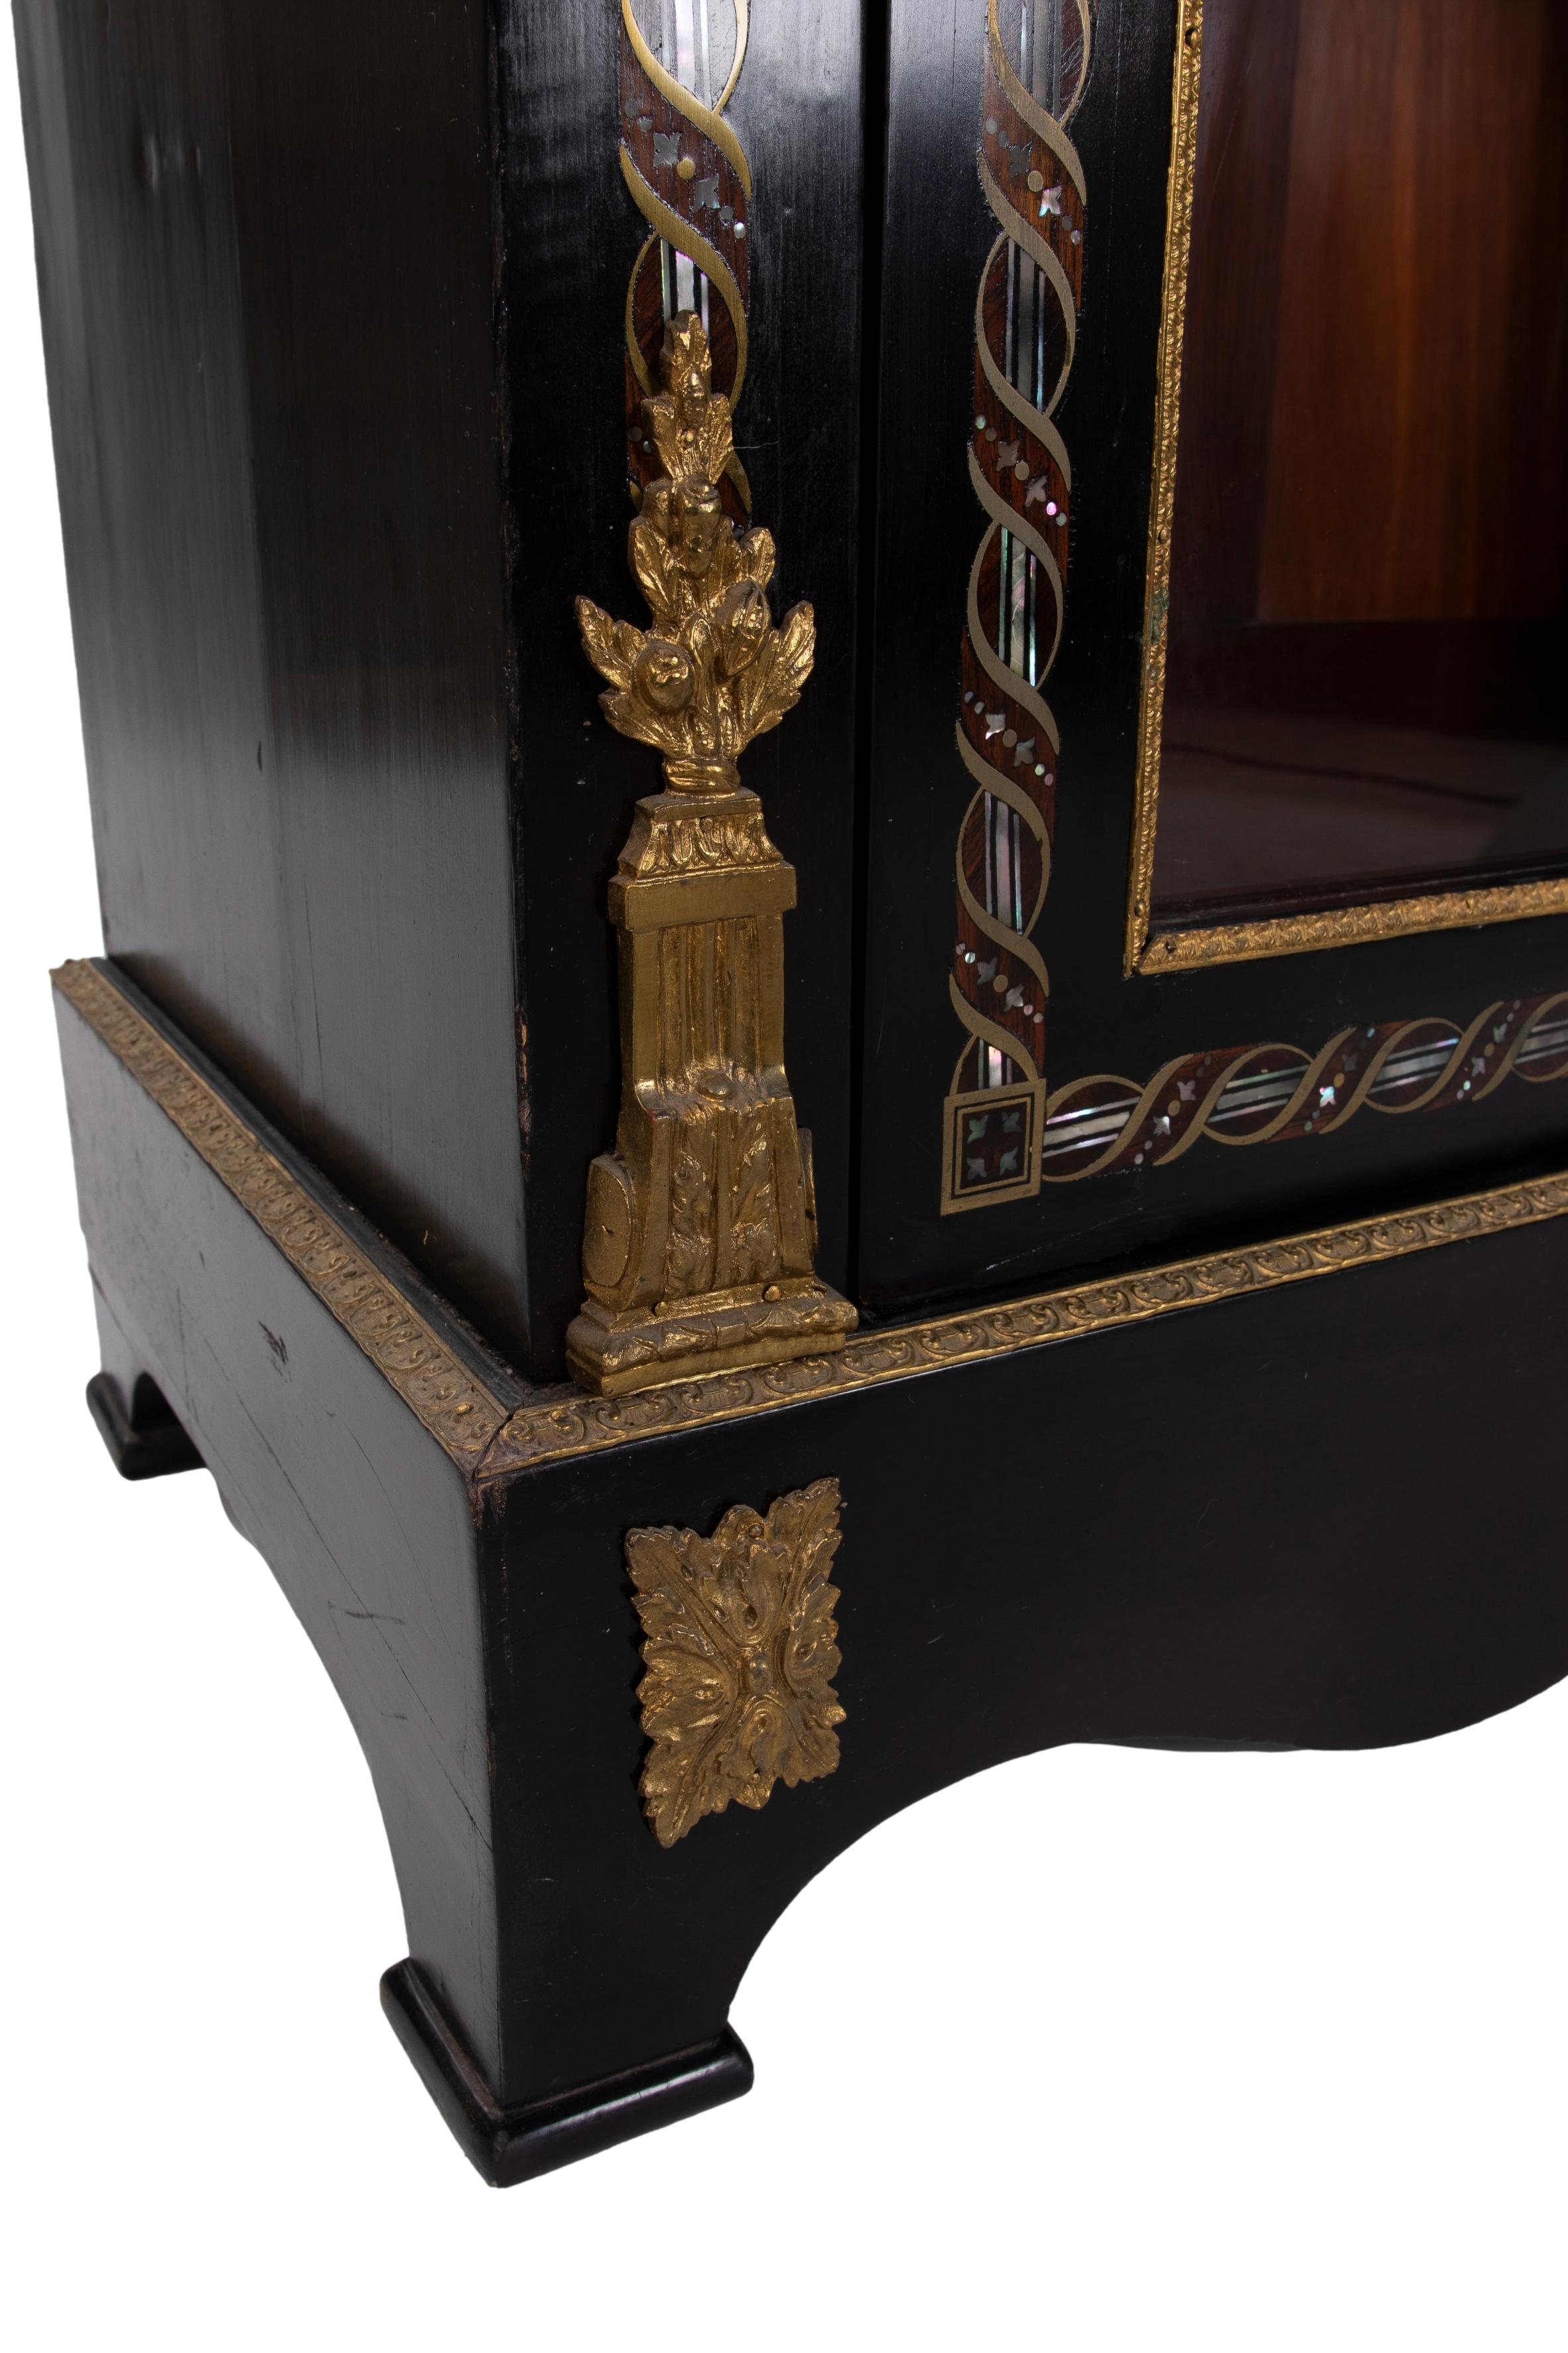 1850s French Ebonized Wood Pier Cabinet w/ Gilt Bronze & Mother of Pearl Inlay For Sale 6